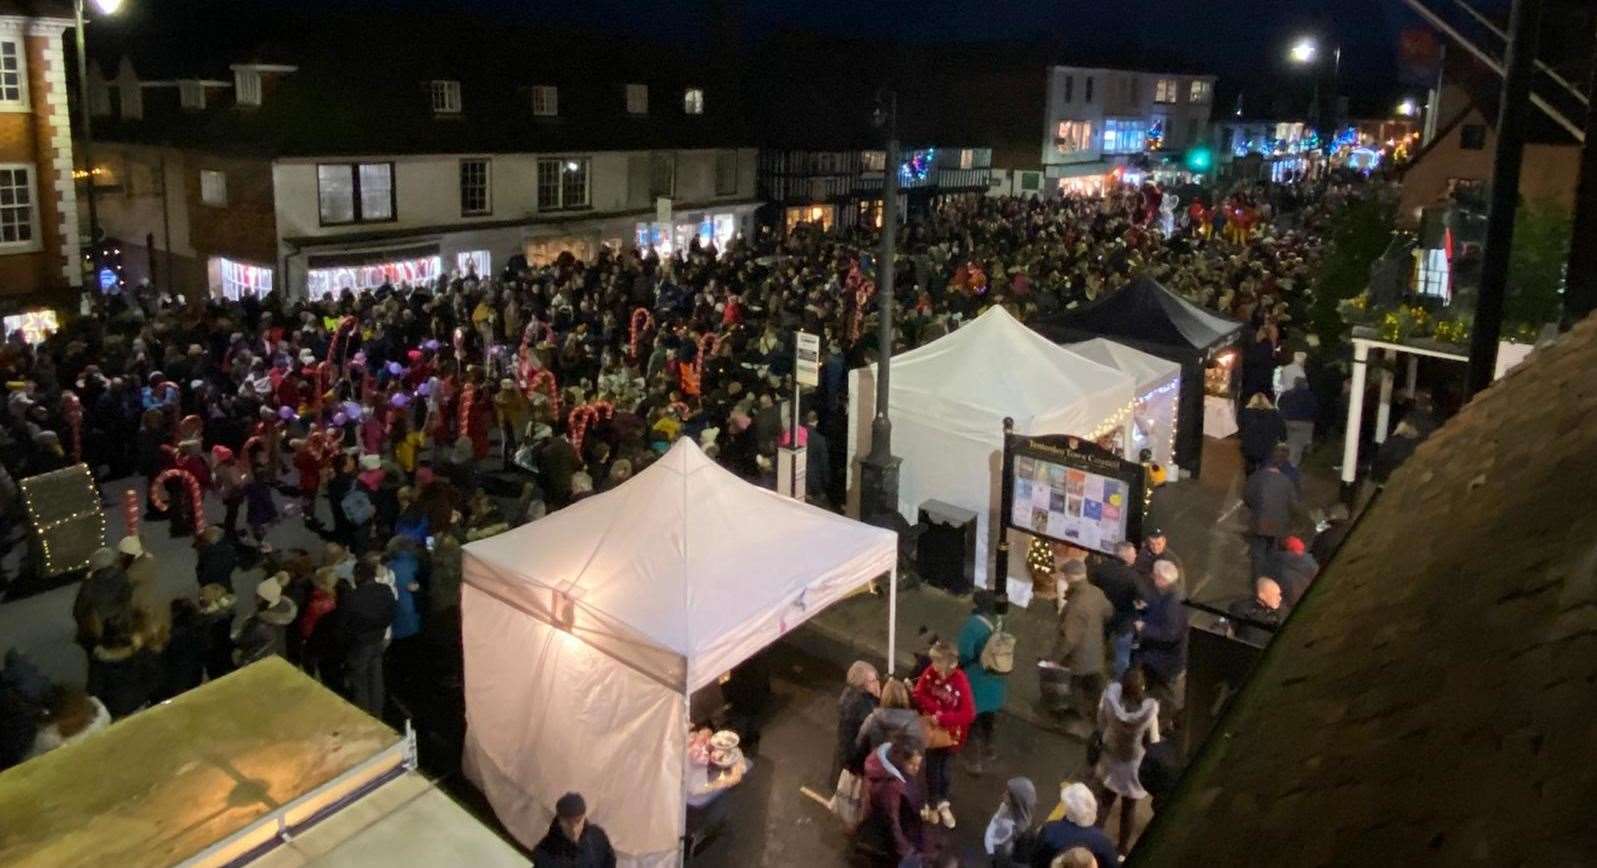 Crowds have been known to flock to the Tenterden Christmas Market